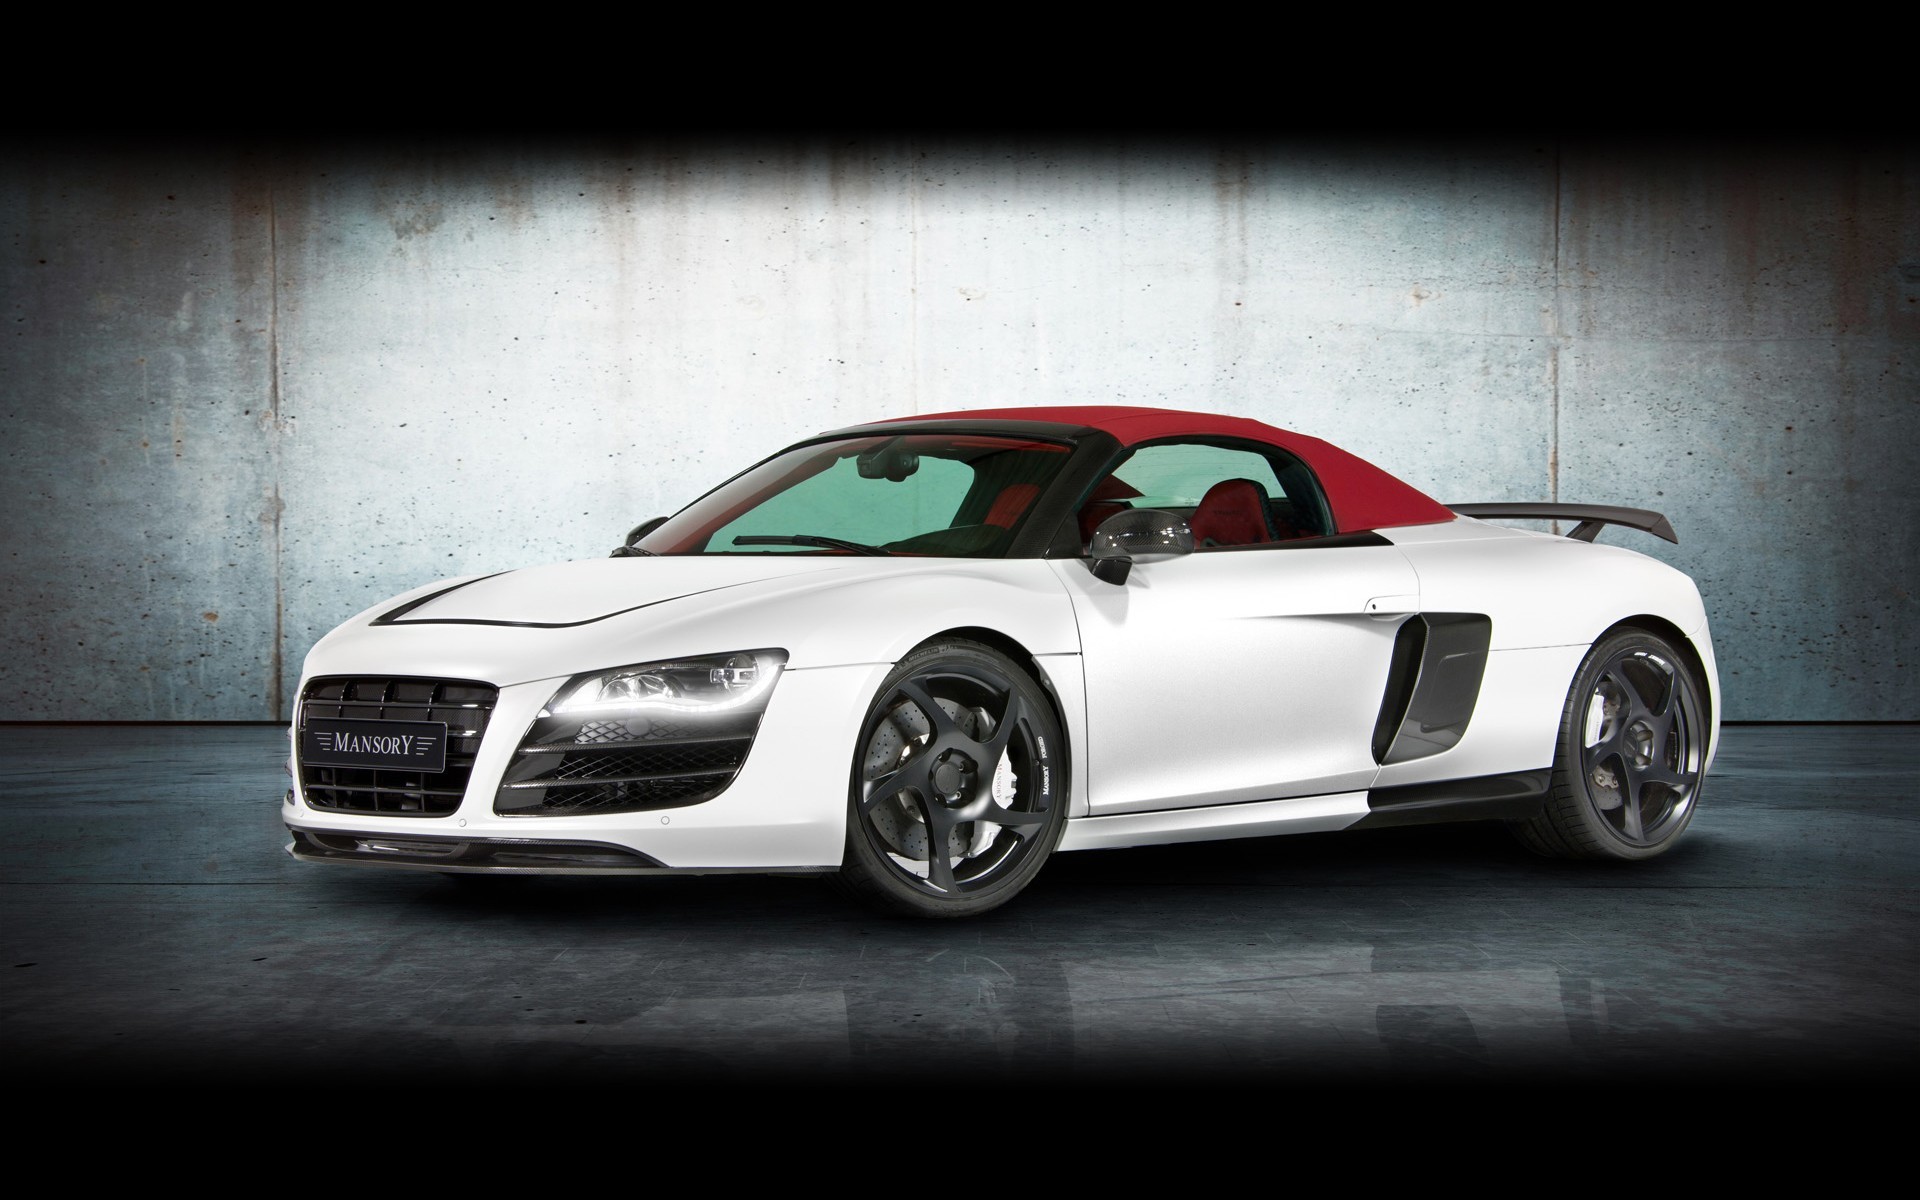 1920x1200 New Sports Car Audi R8 At Image Y9jh With Sports Car Audi Newest On Wall